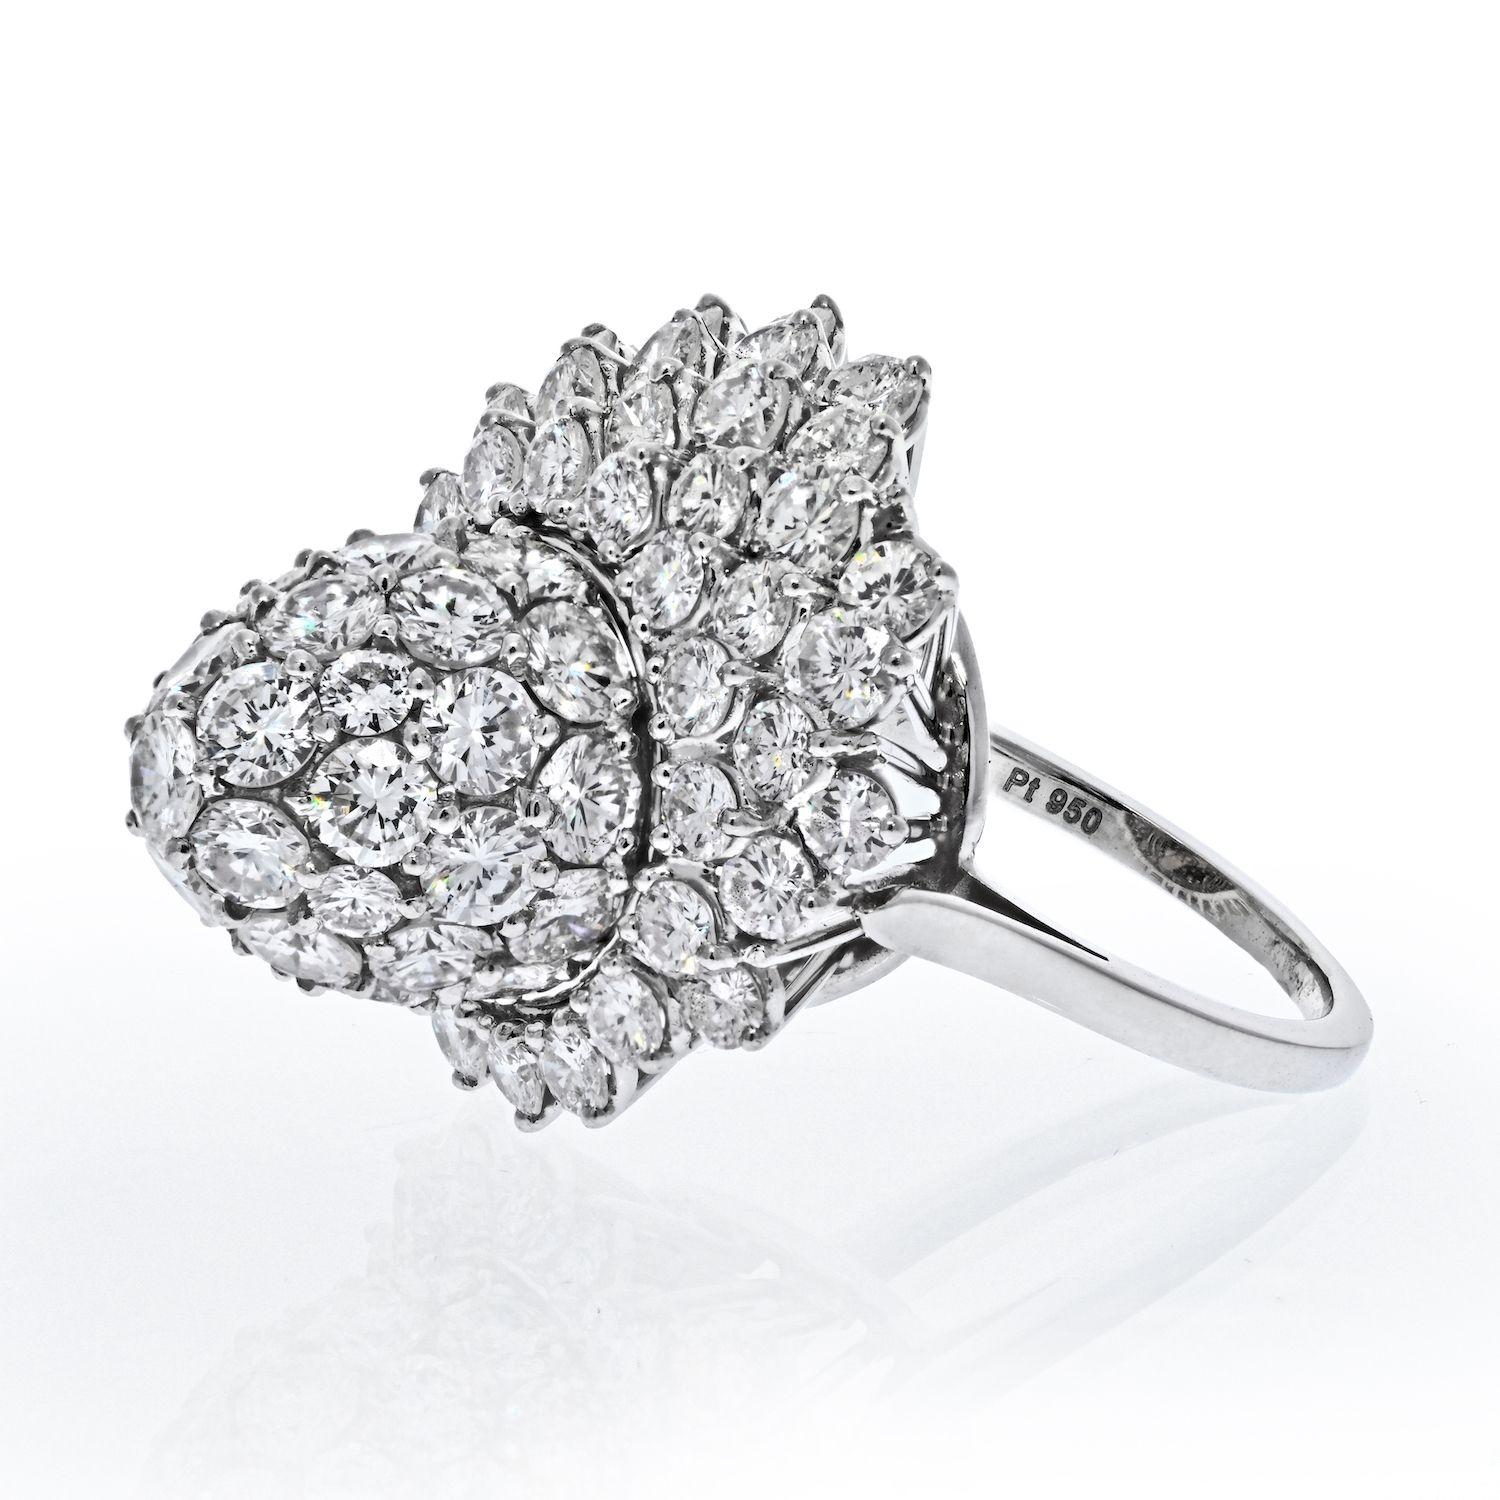 Exceptional quality comes from Cartier: foilage inspired diaond ring in platinum, crafted with round cut diamonds of an approx. 5.85cttw. 
Diamonds are extremely brilliant and clean. 
This is an unusual shape ring, it does remind us of a tulip but